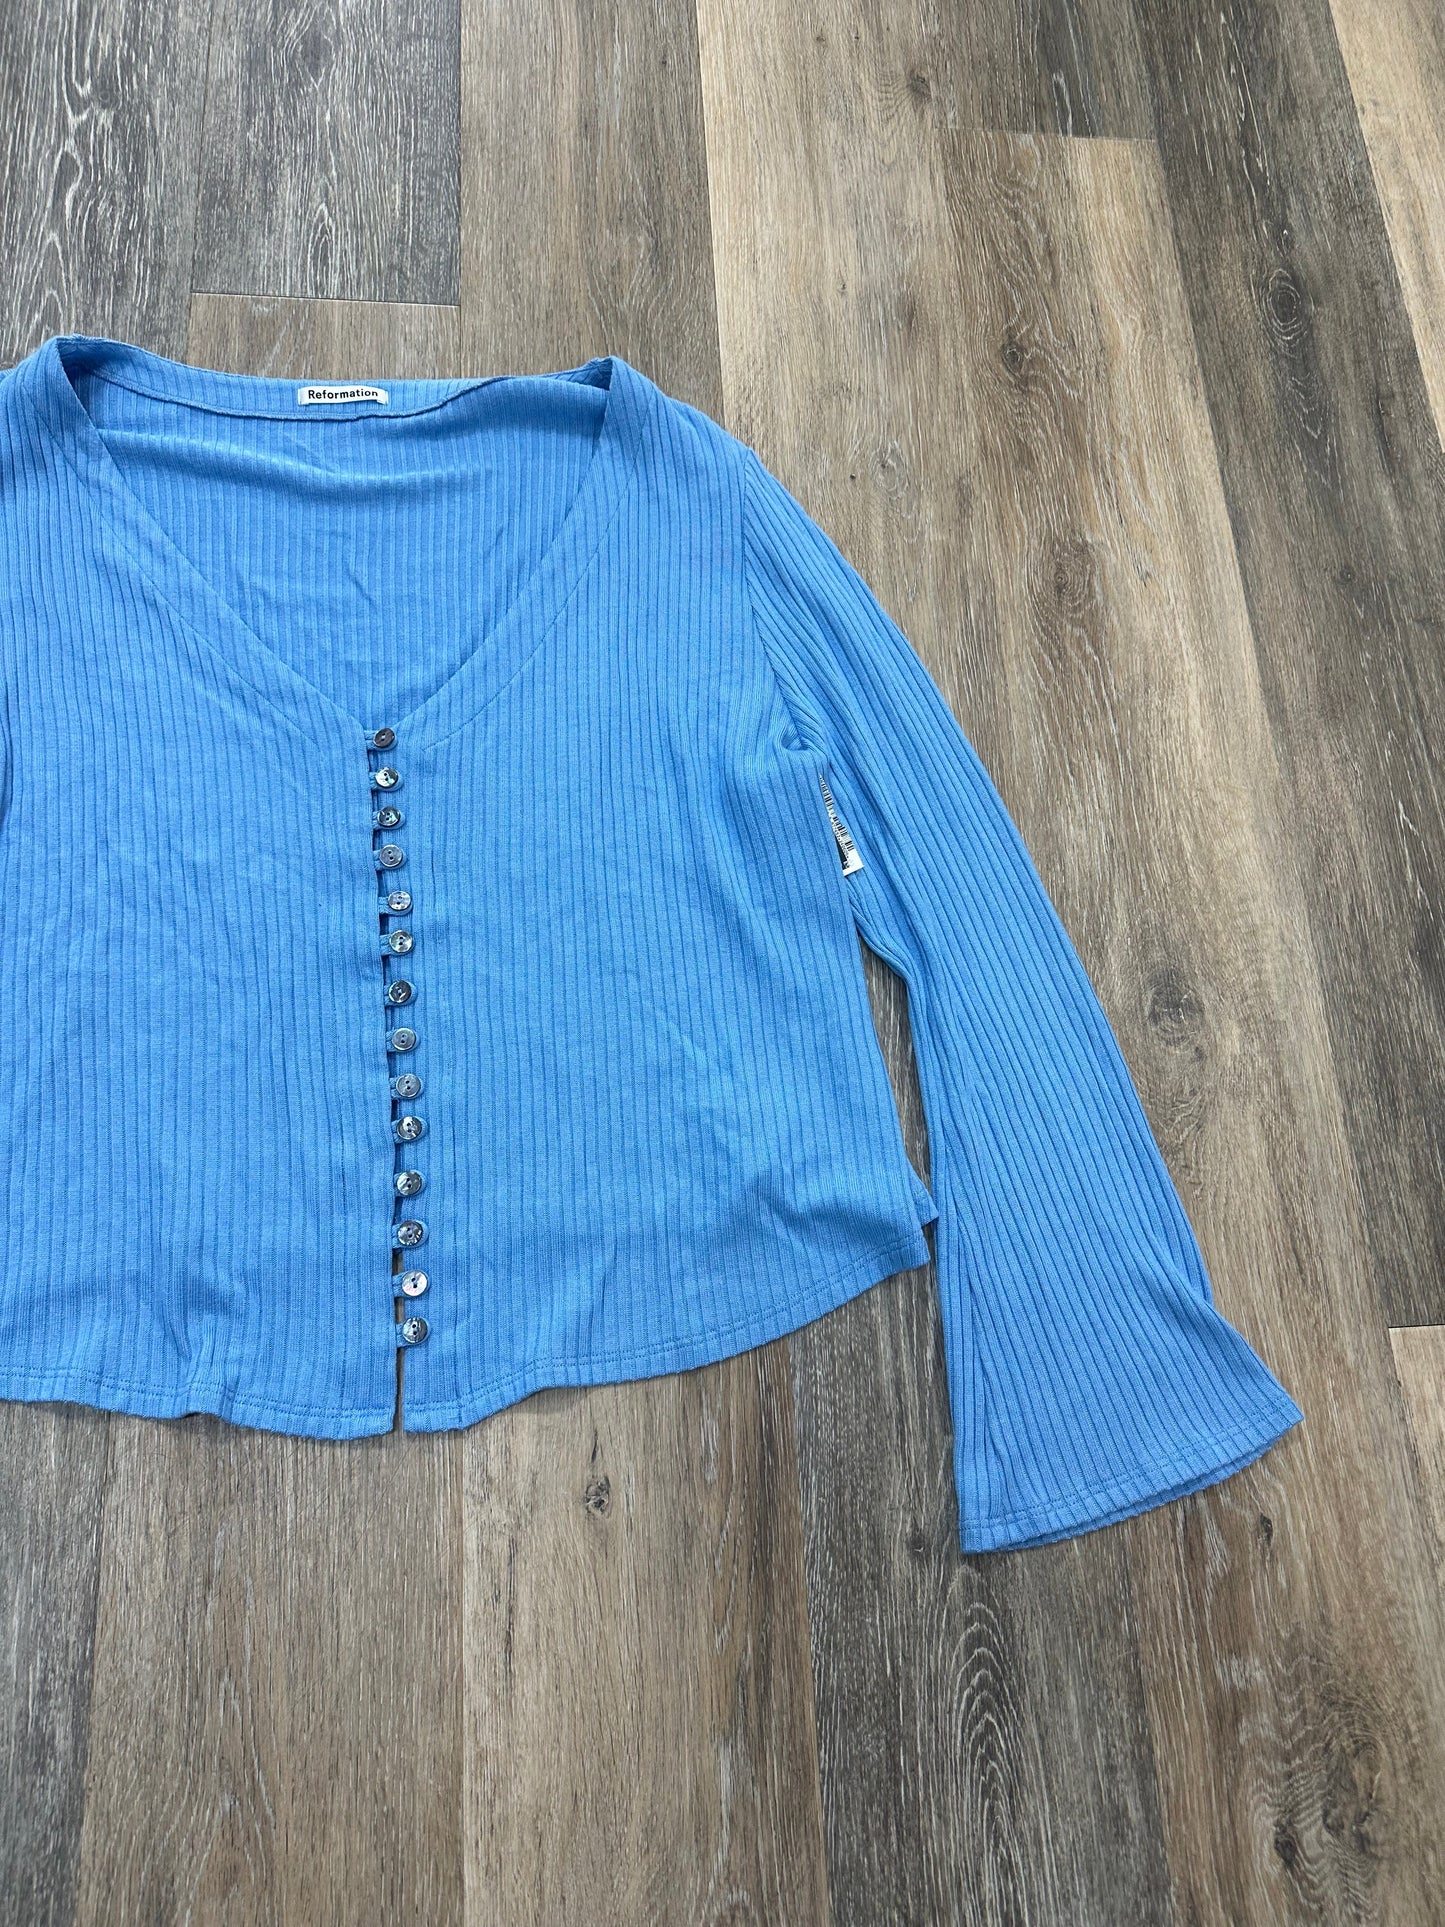 Blue Blouse Long Sleeve Reformation, Size 3x